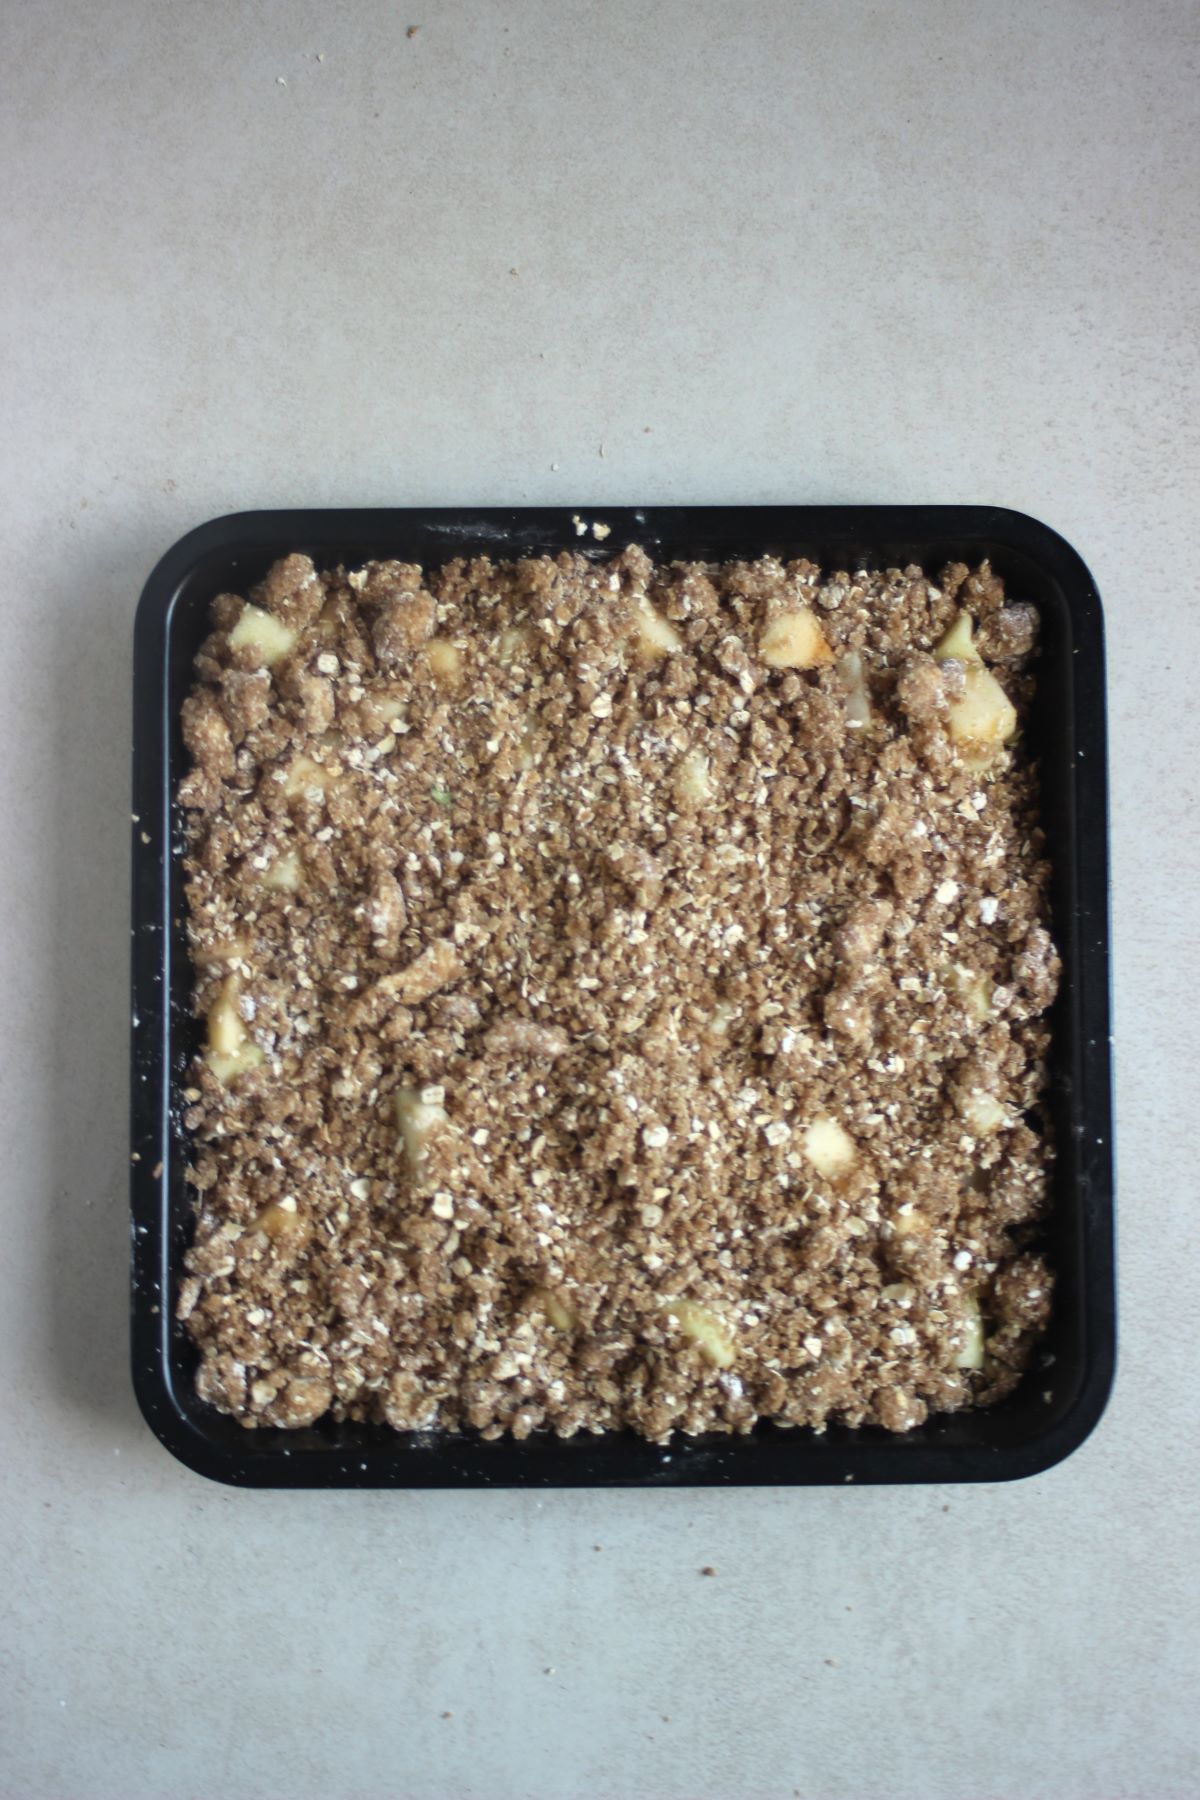 Baking dish with apple crisp before baked seen from above.